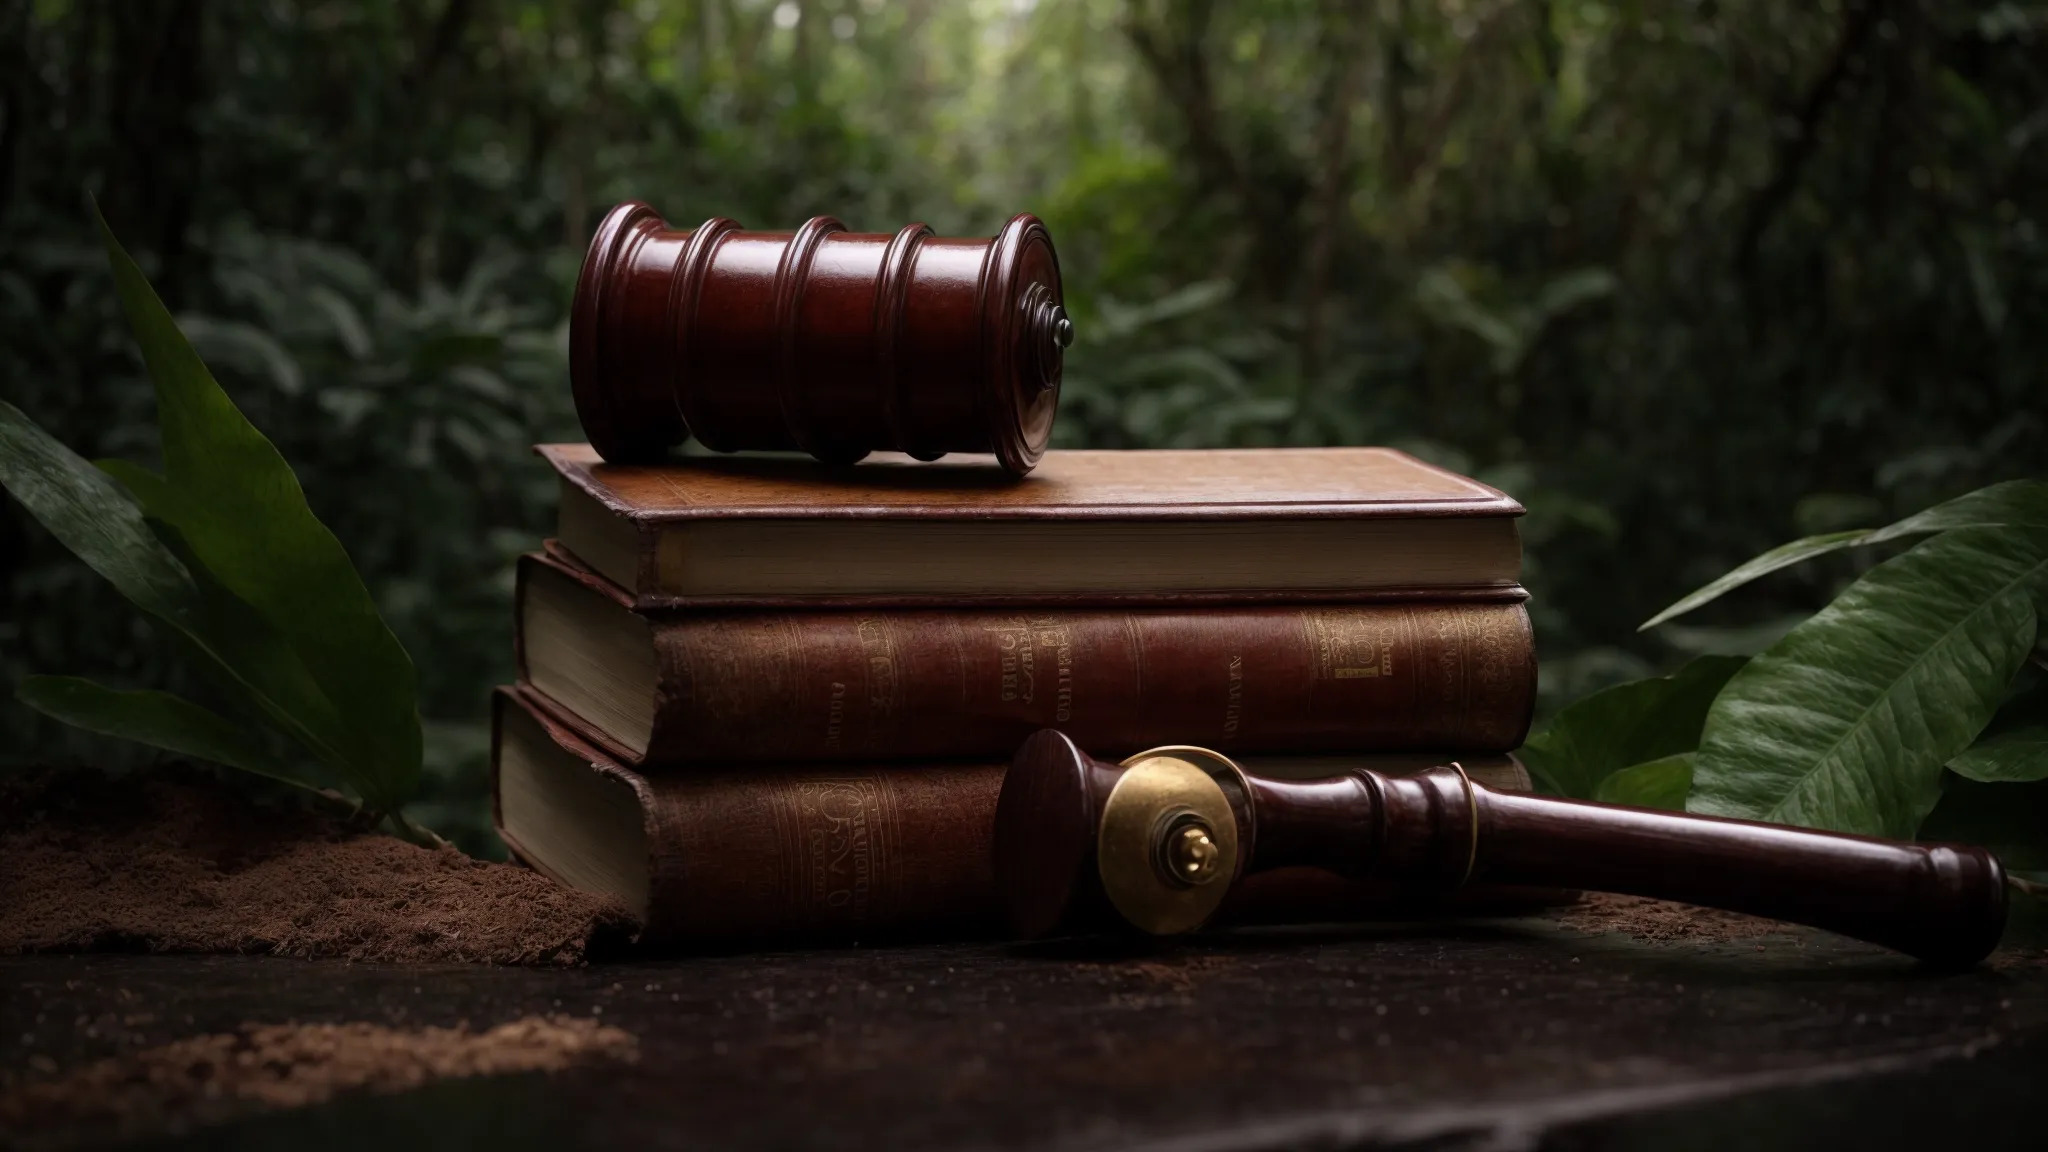 a widescreen image depicting a gavel on a law book and an oil barrel against a backdrop of the dense ecuadorian amazon rainforest.